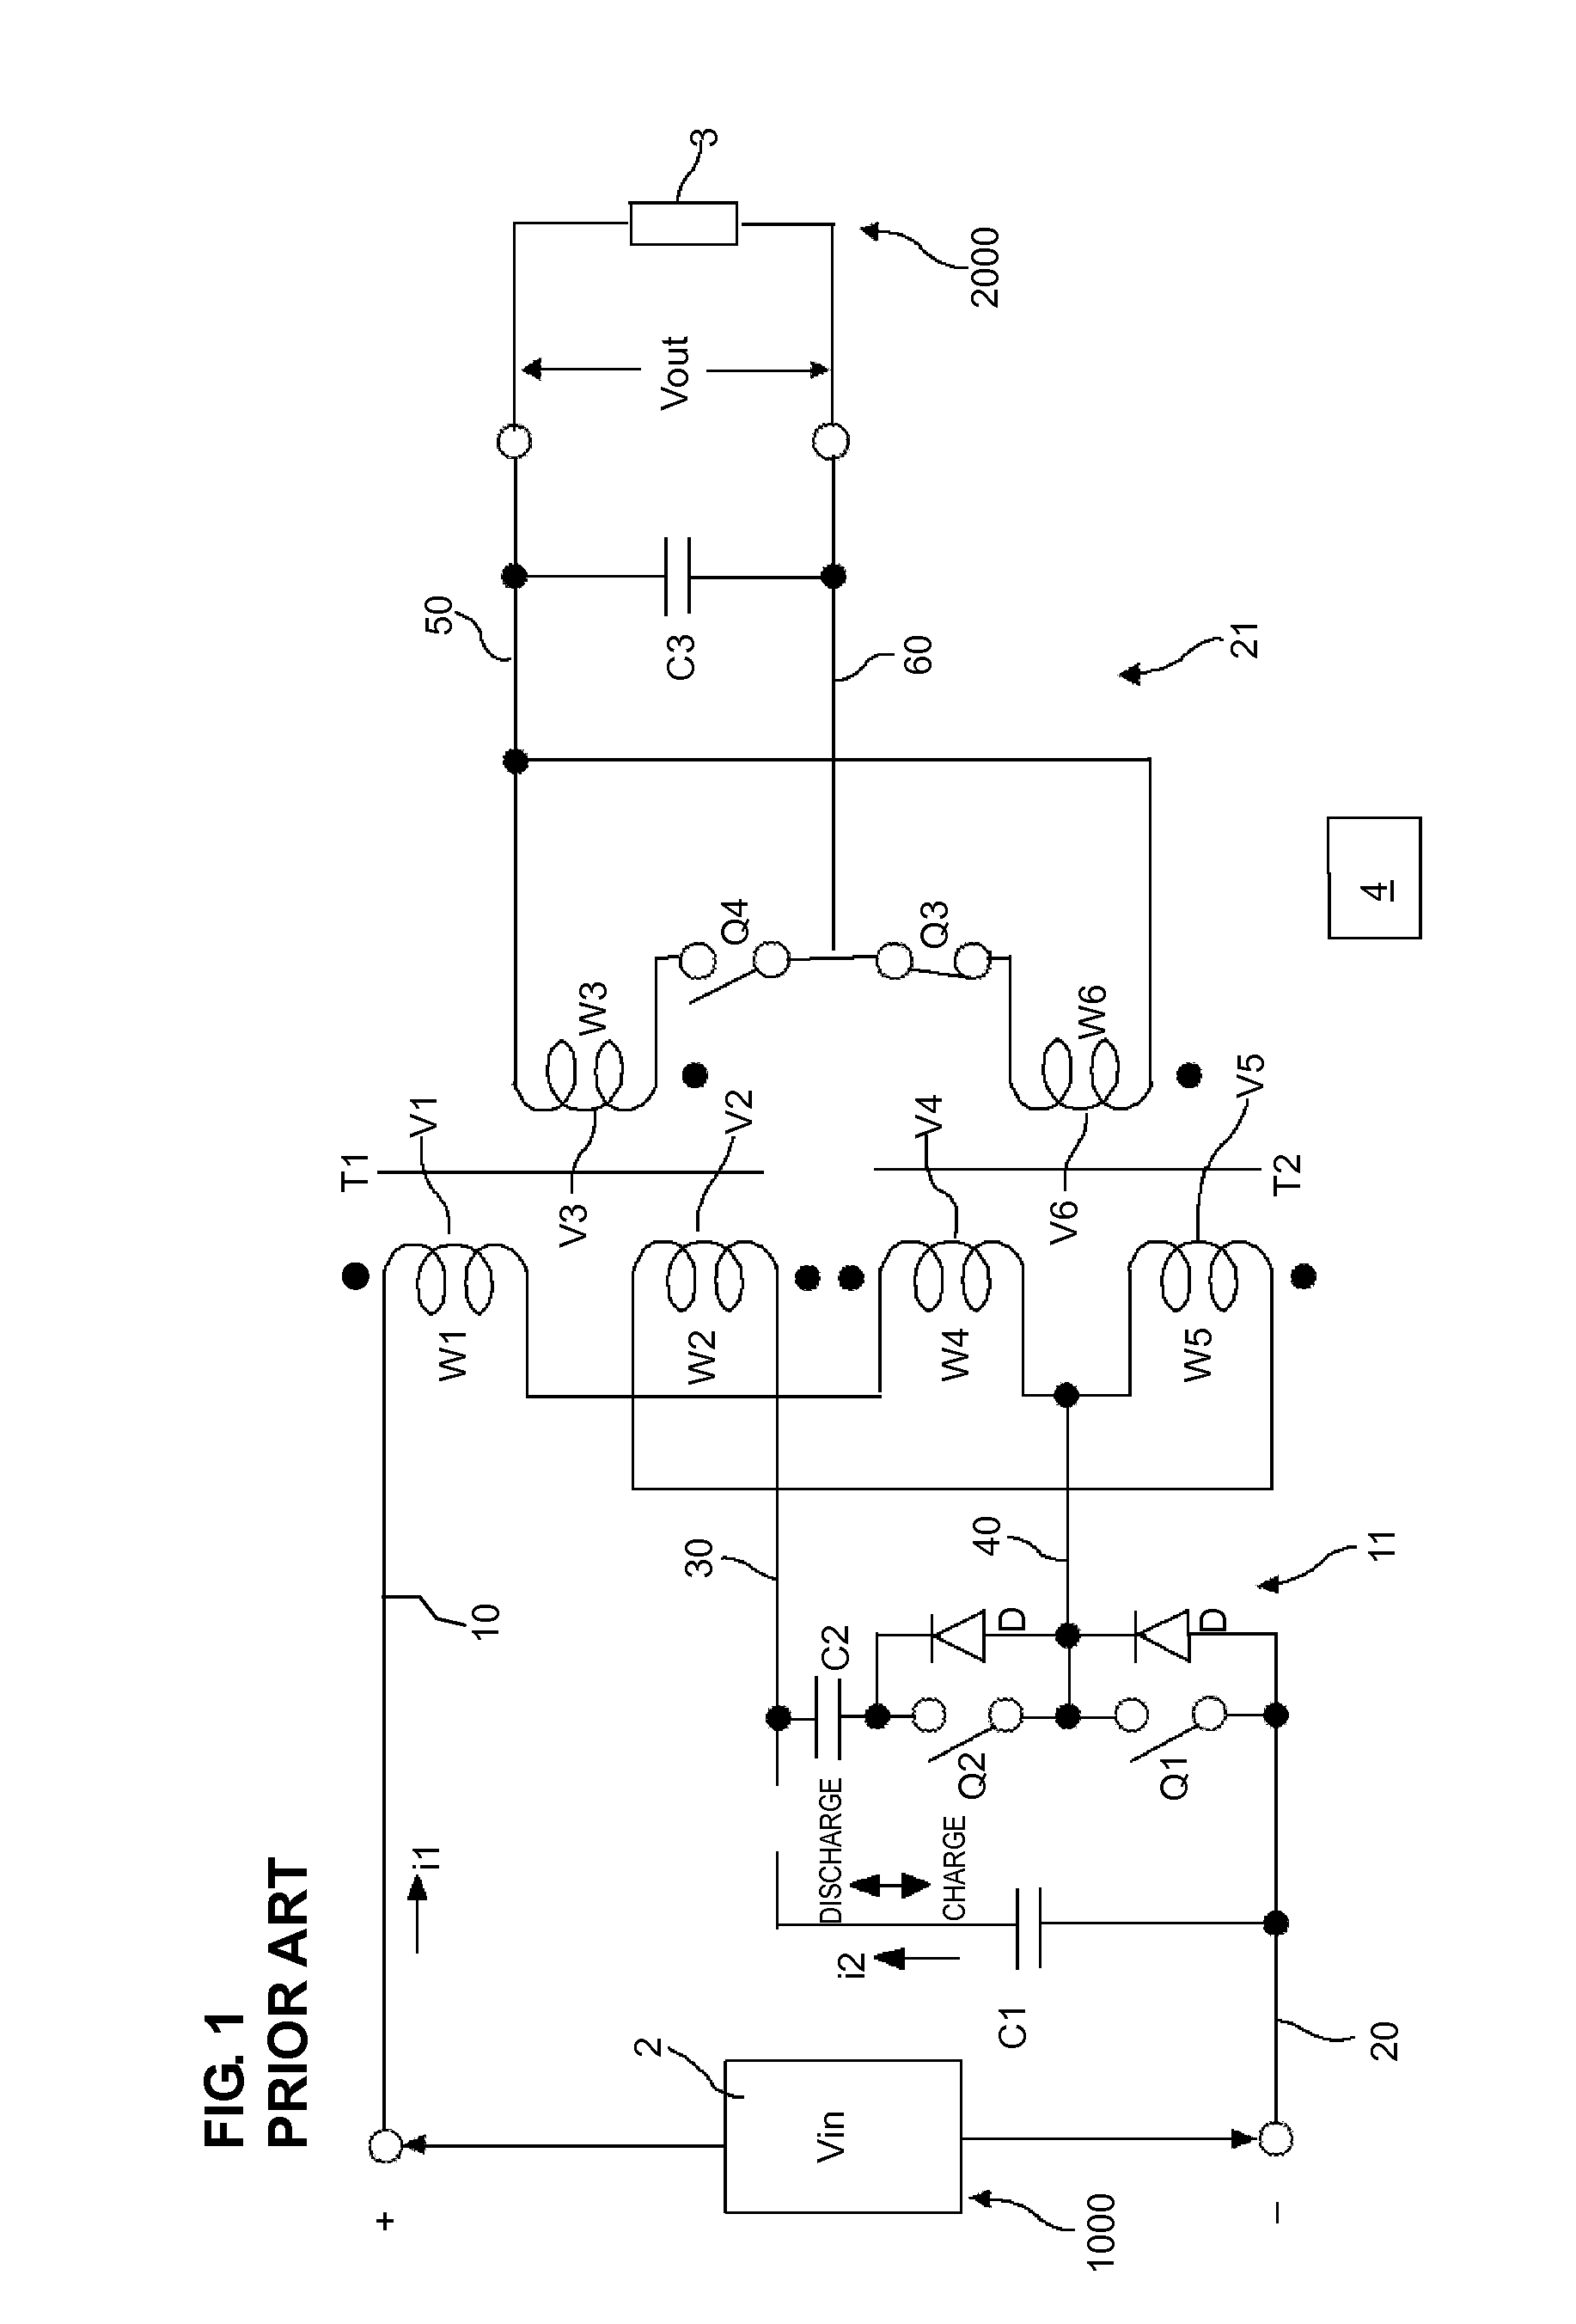 Isolated switching power supply apparatus